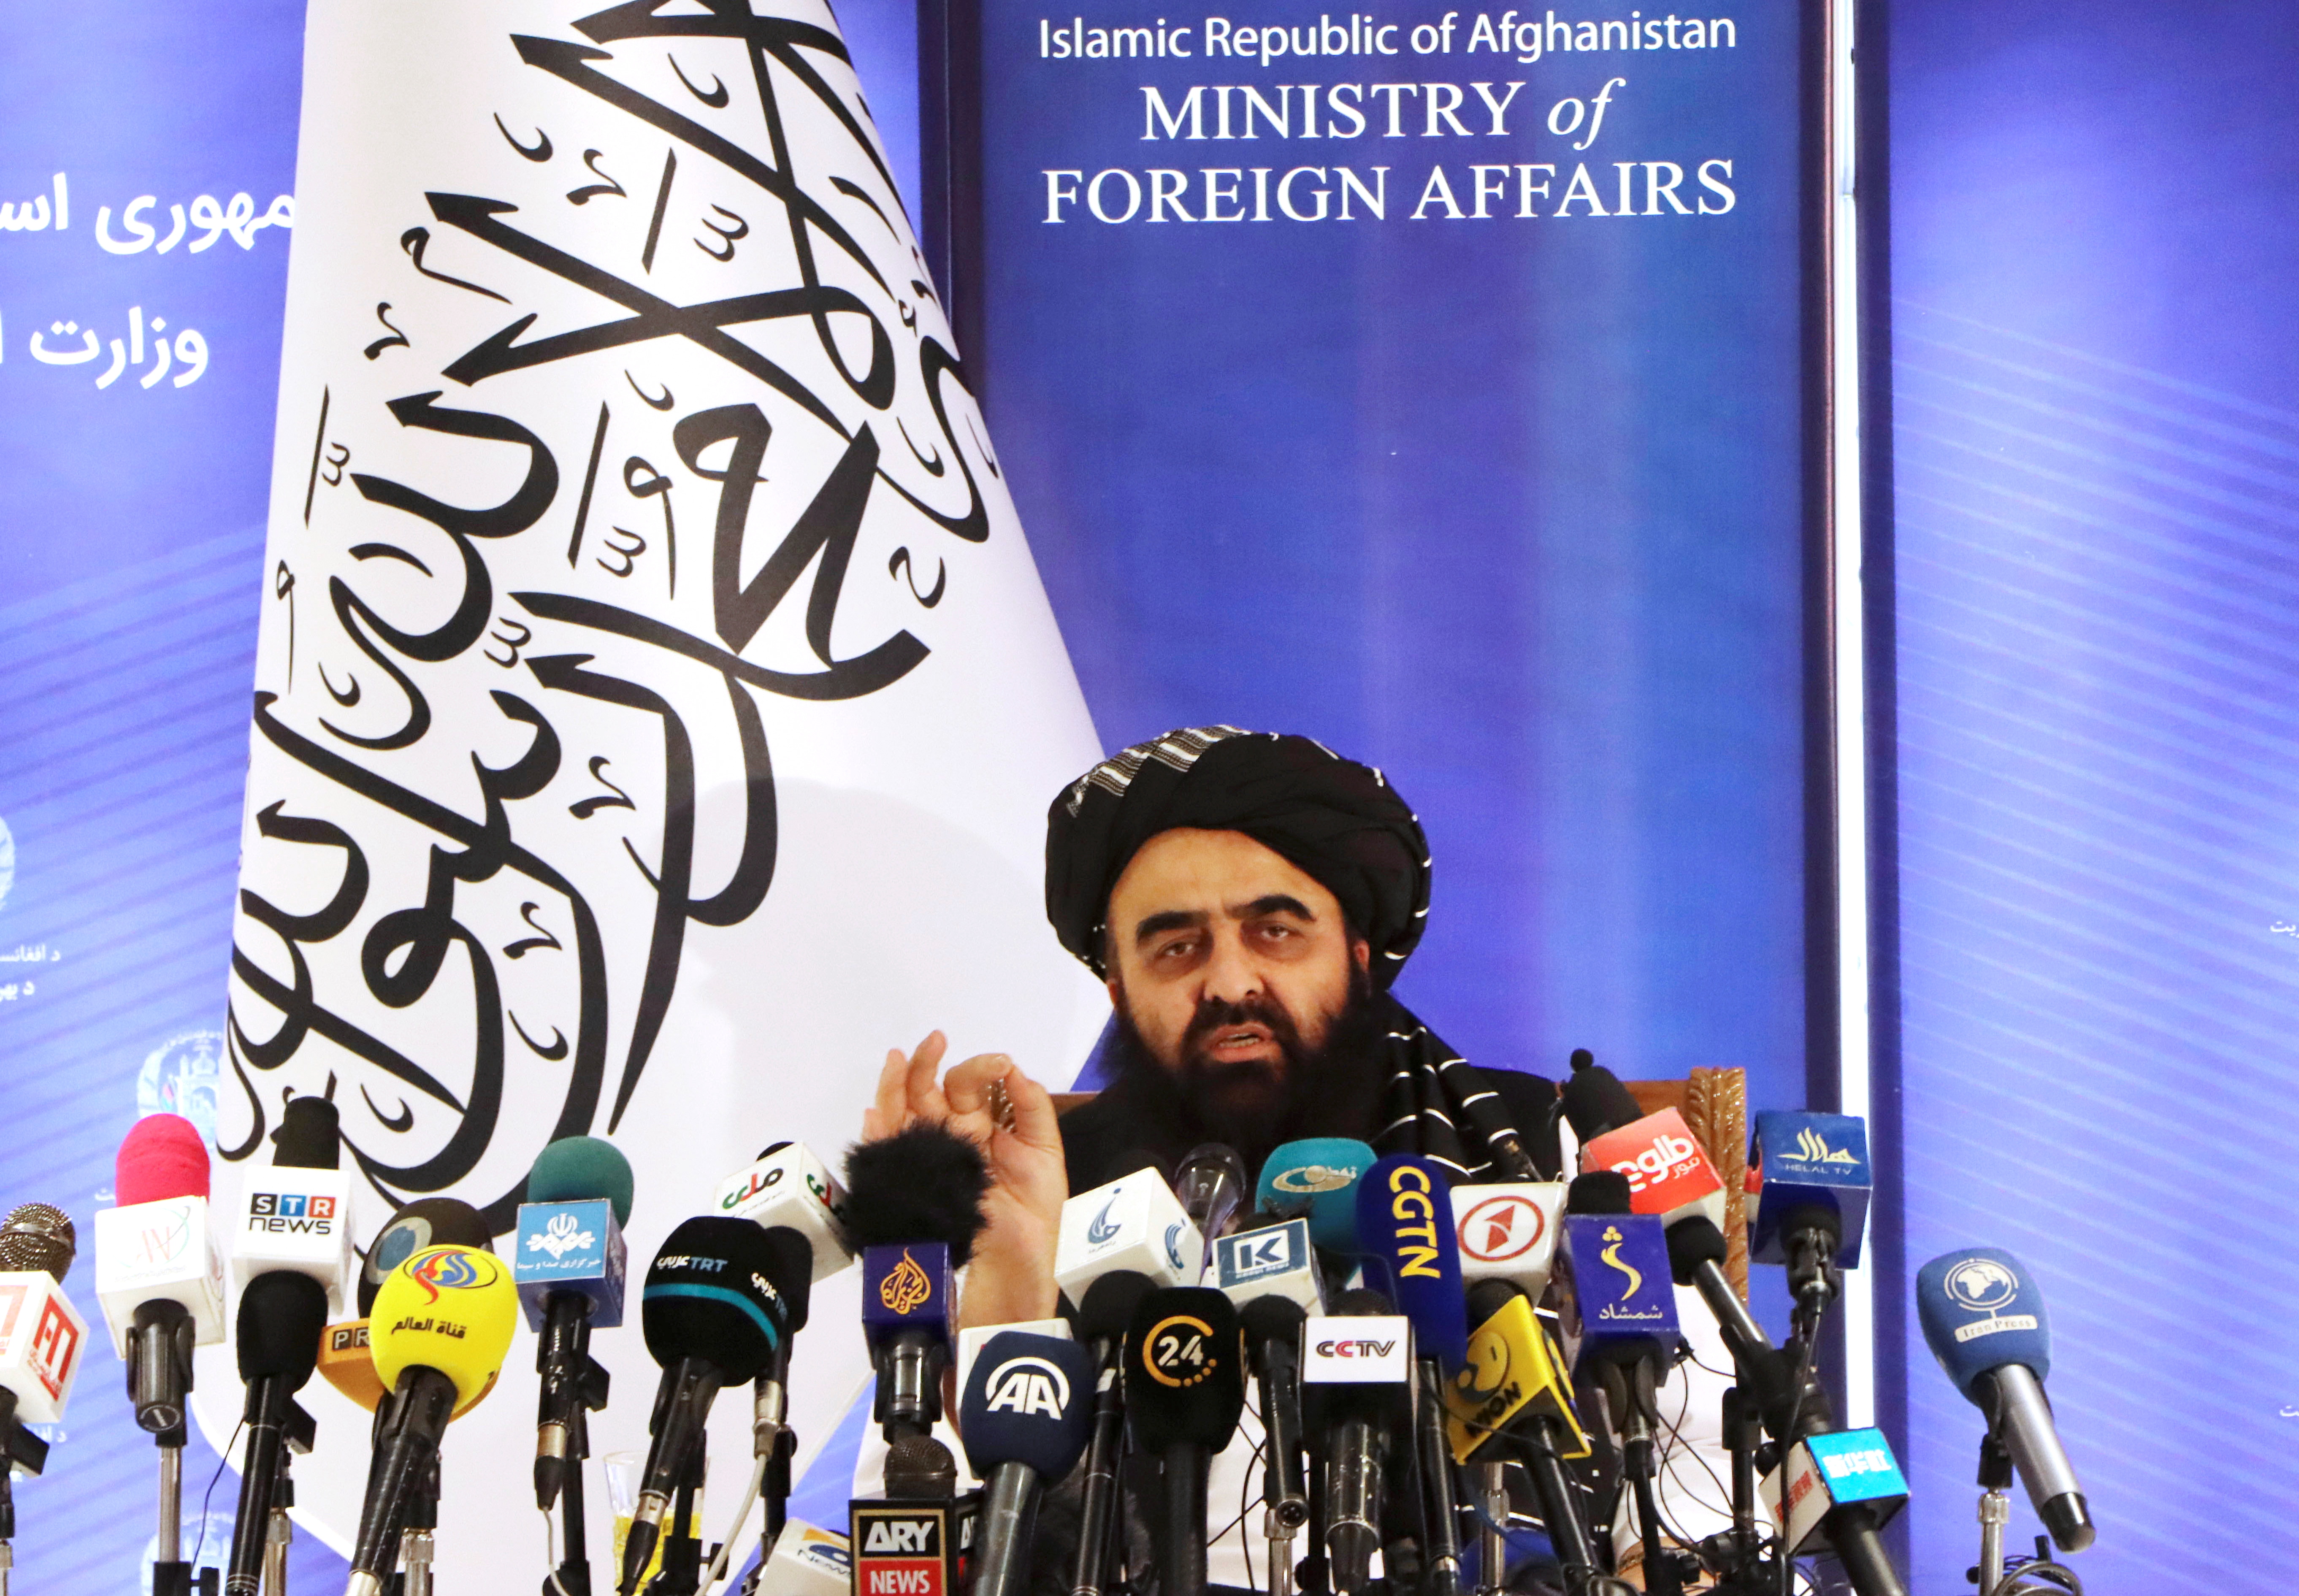 Taliban acting Foreign Minister Amir Khan Muttaqi speaks during a news conference in Kabul